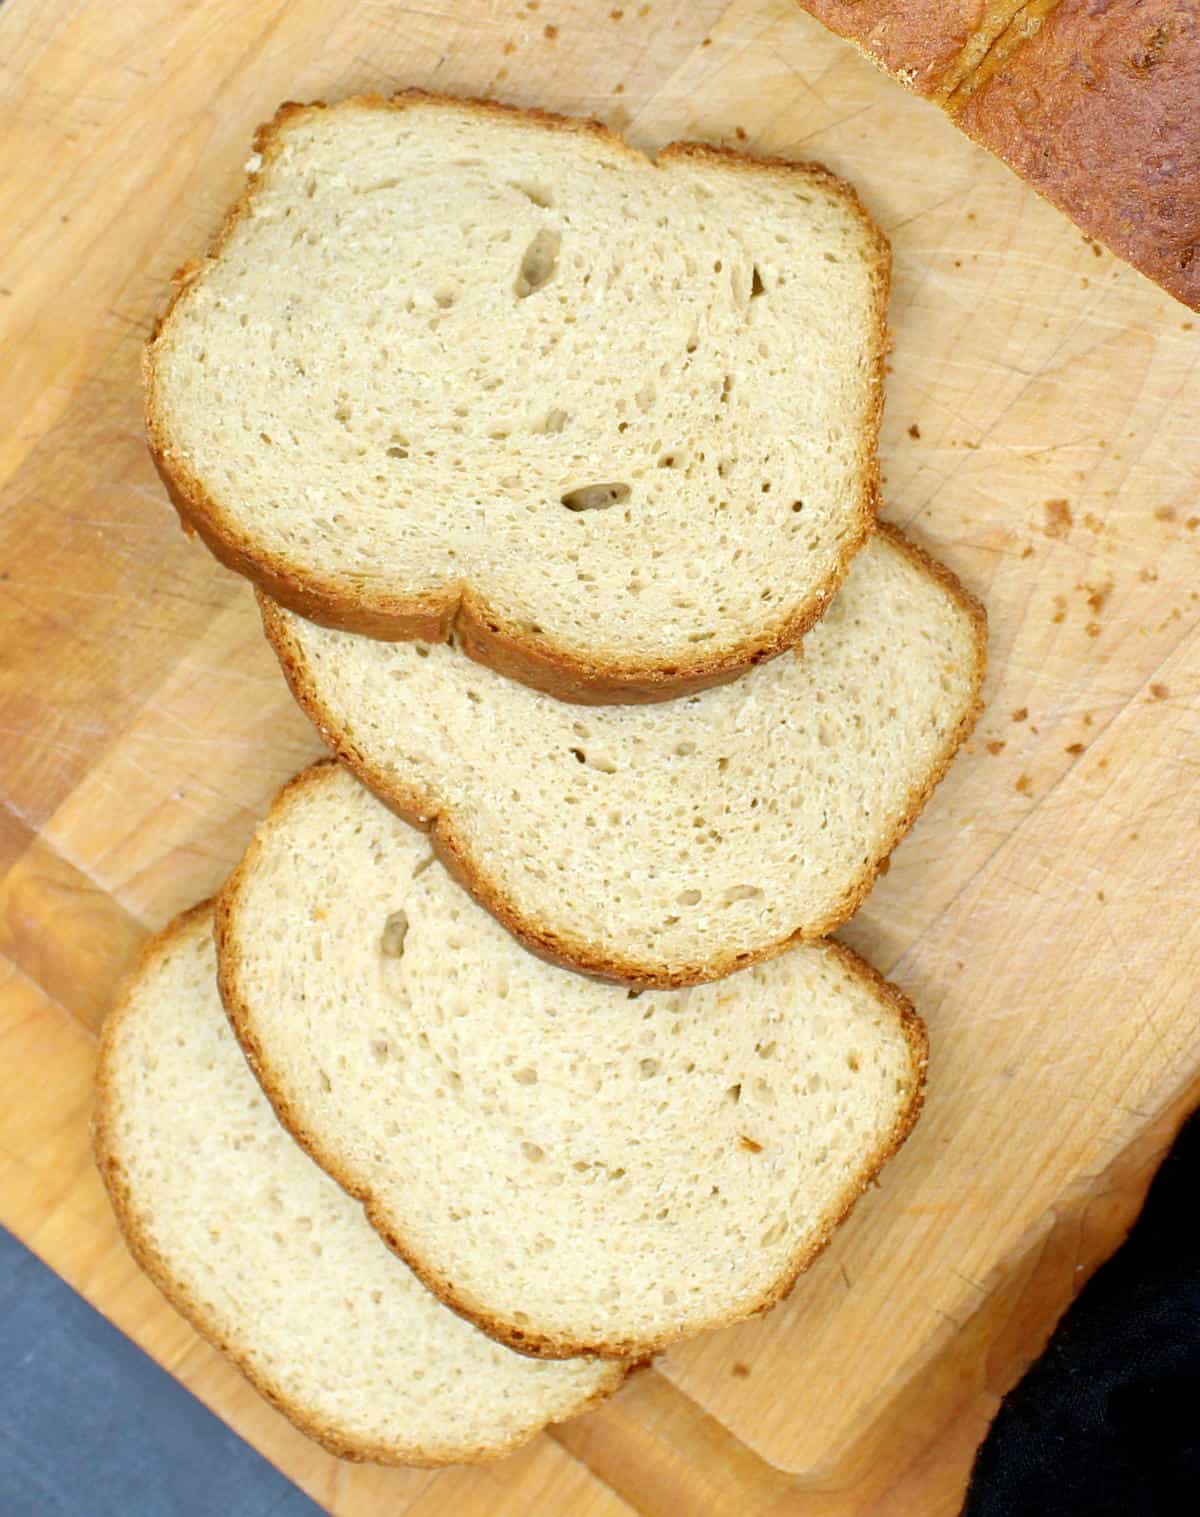 Flour slices of whole wheat sandwich bread on a chopping board.